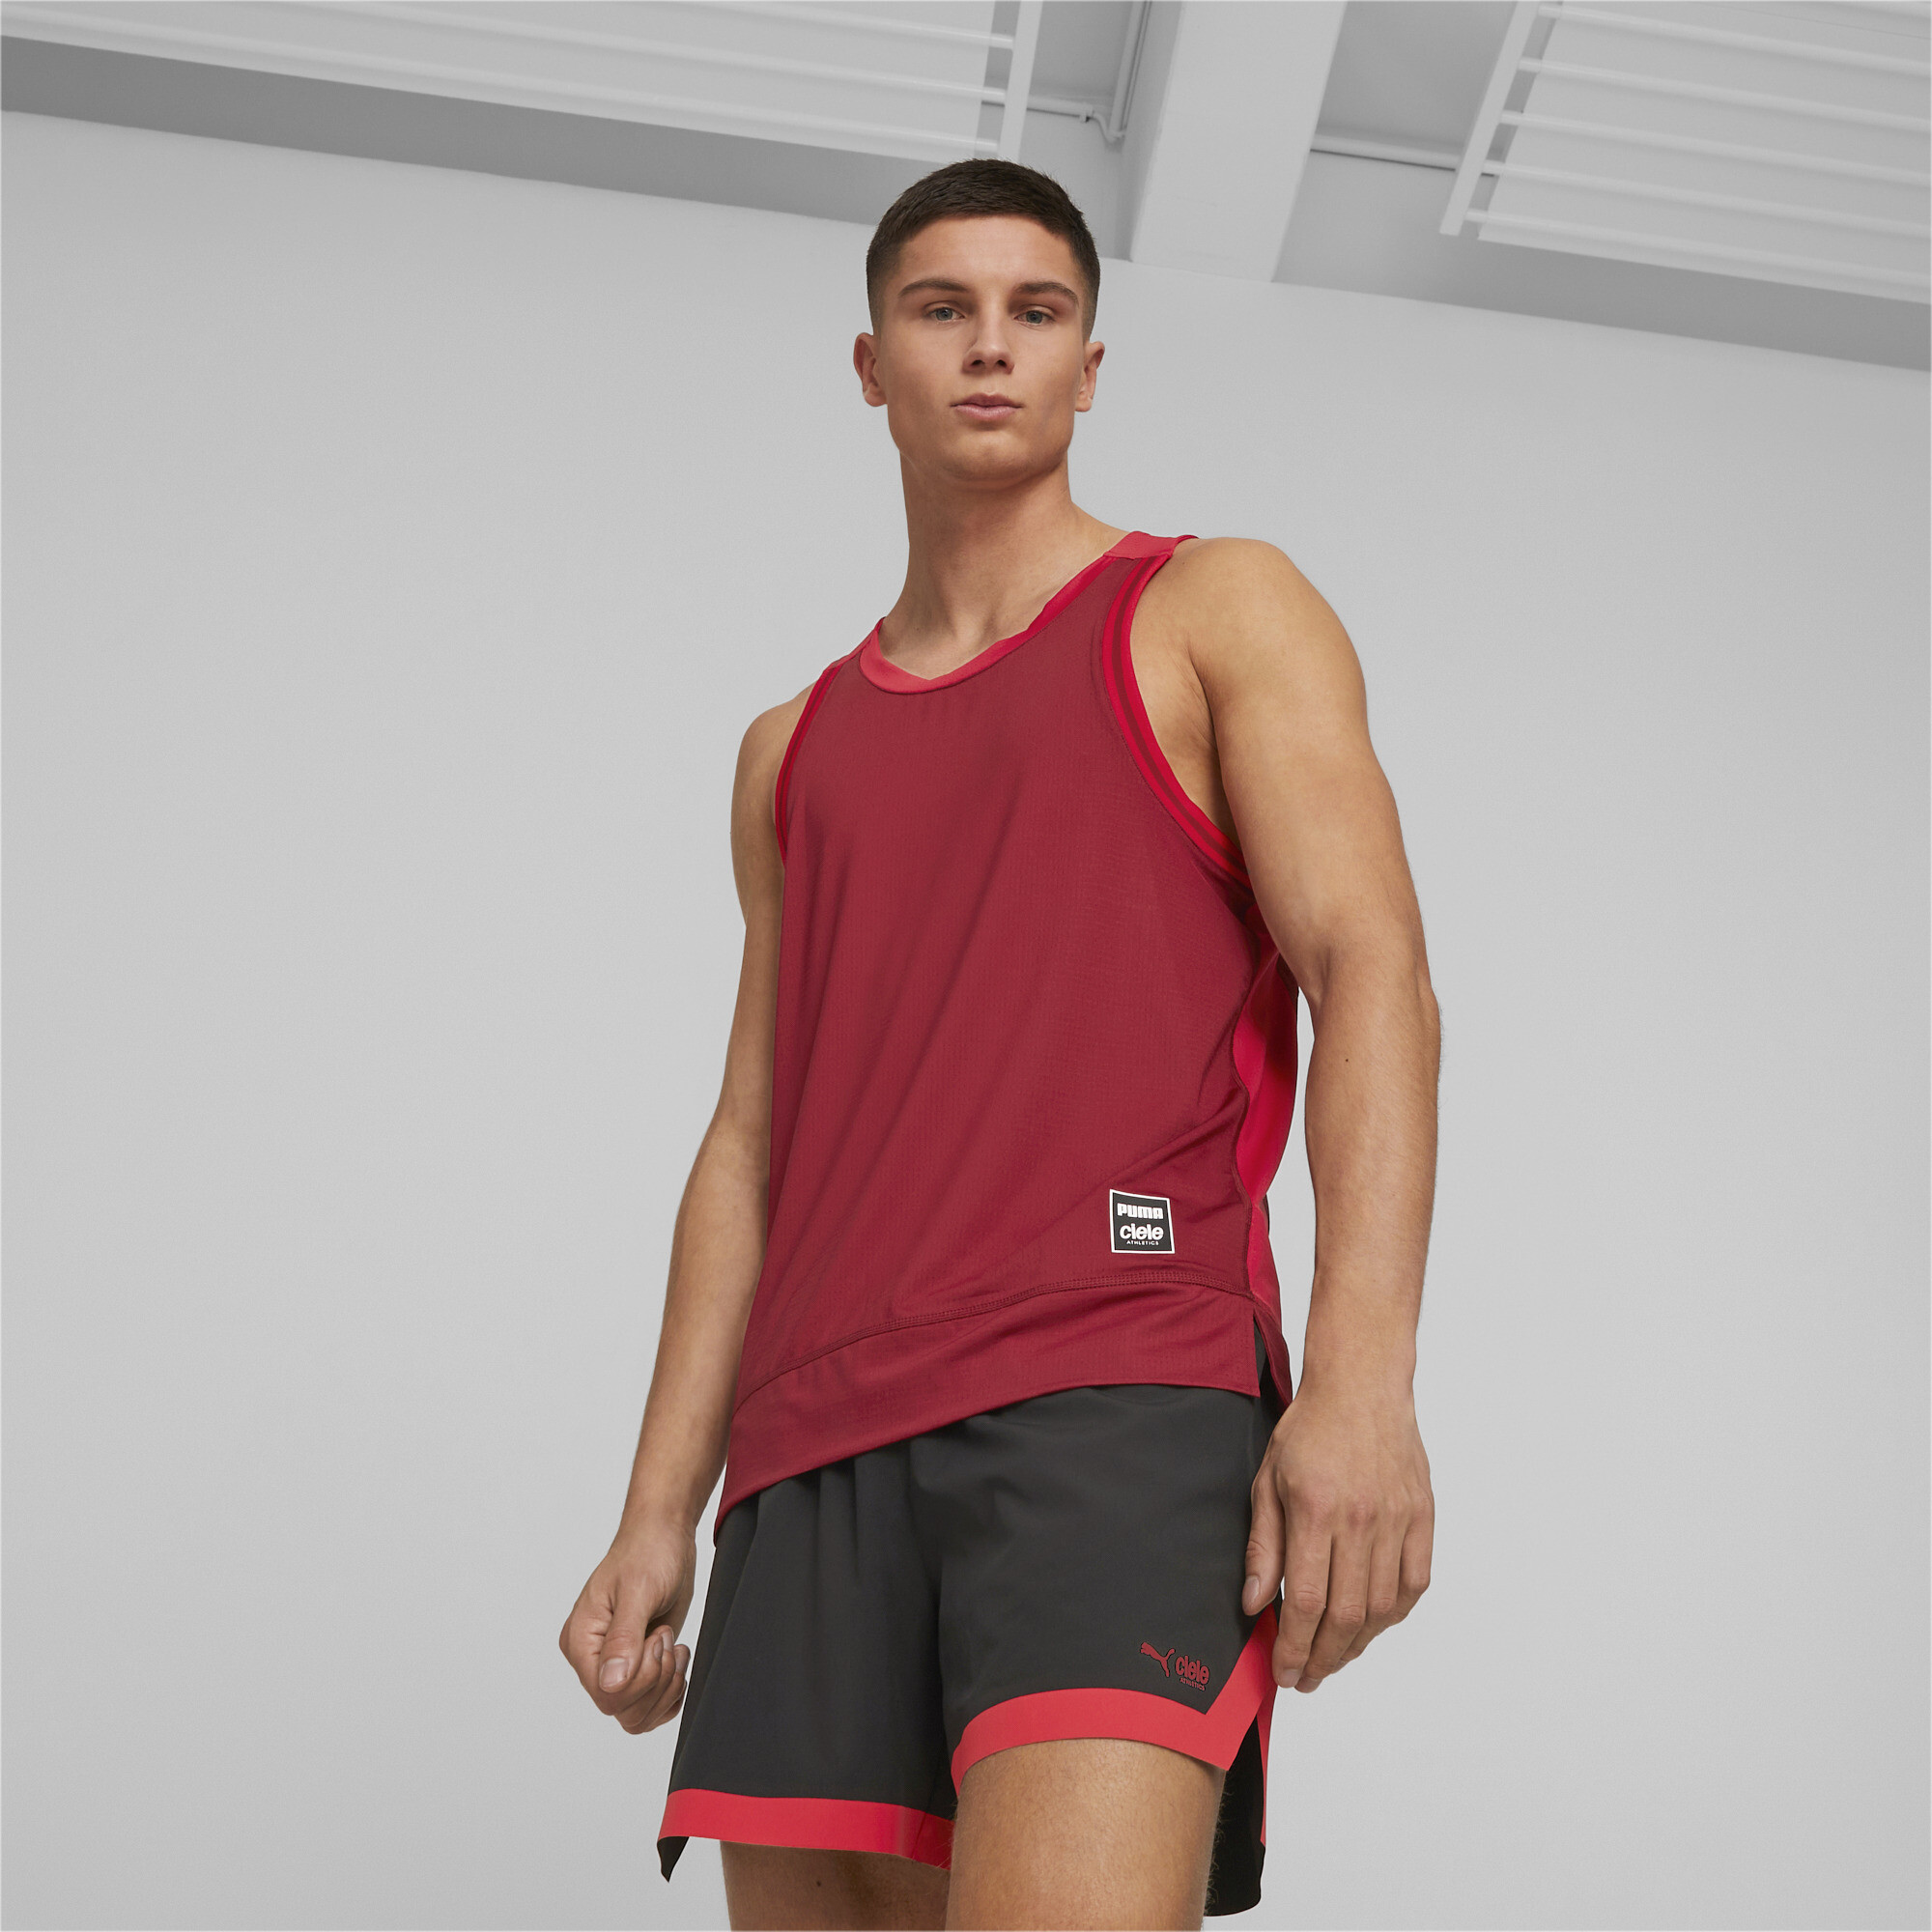 Men's PUMA X CIELE Running Singlet In Red, Size Small